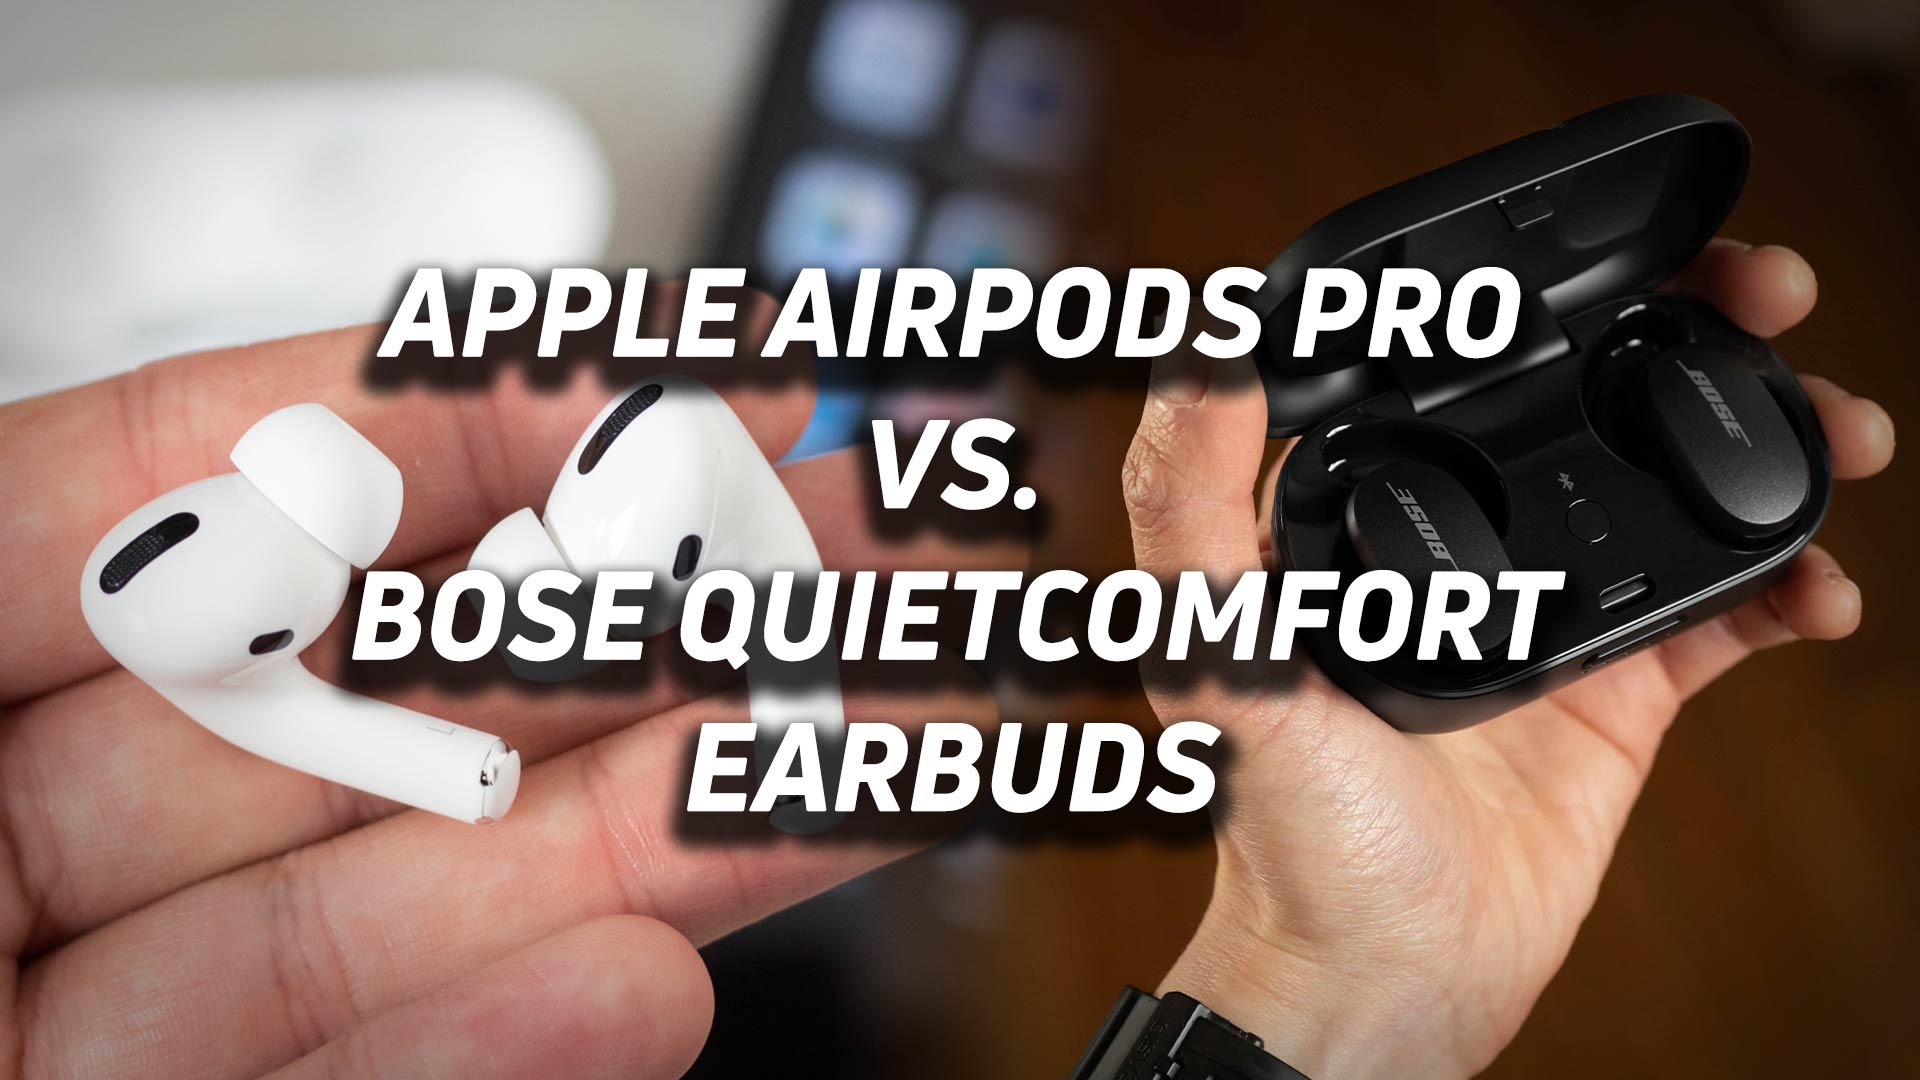 The Apple AirPods Pro and Bose QuietComfort Earbuds in a blended image with versus text overlaid.